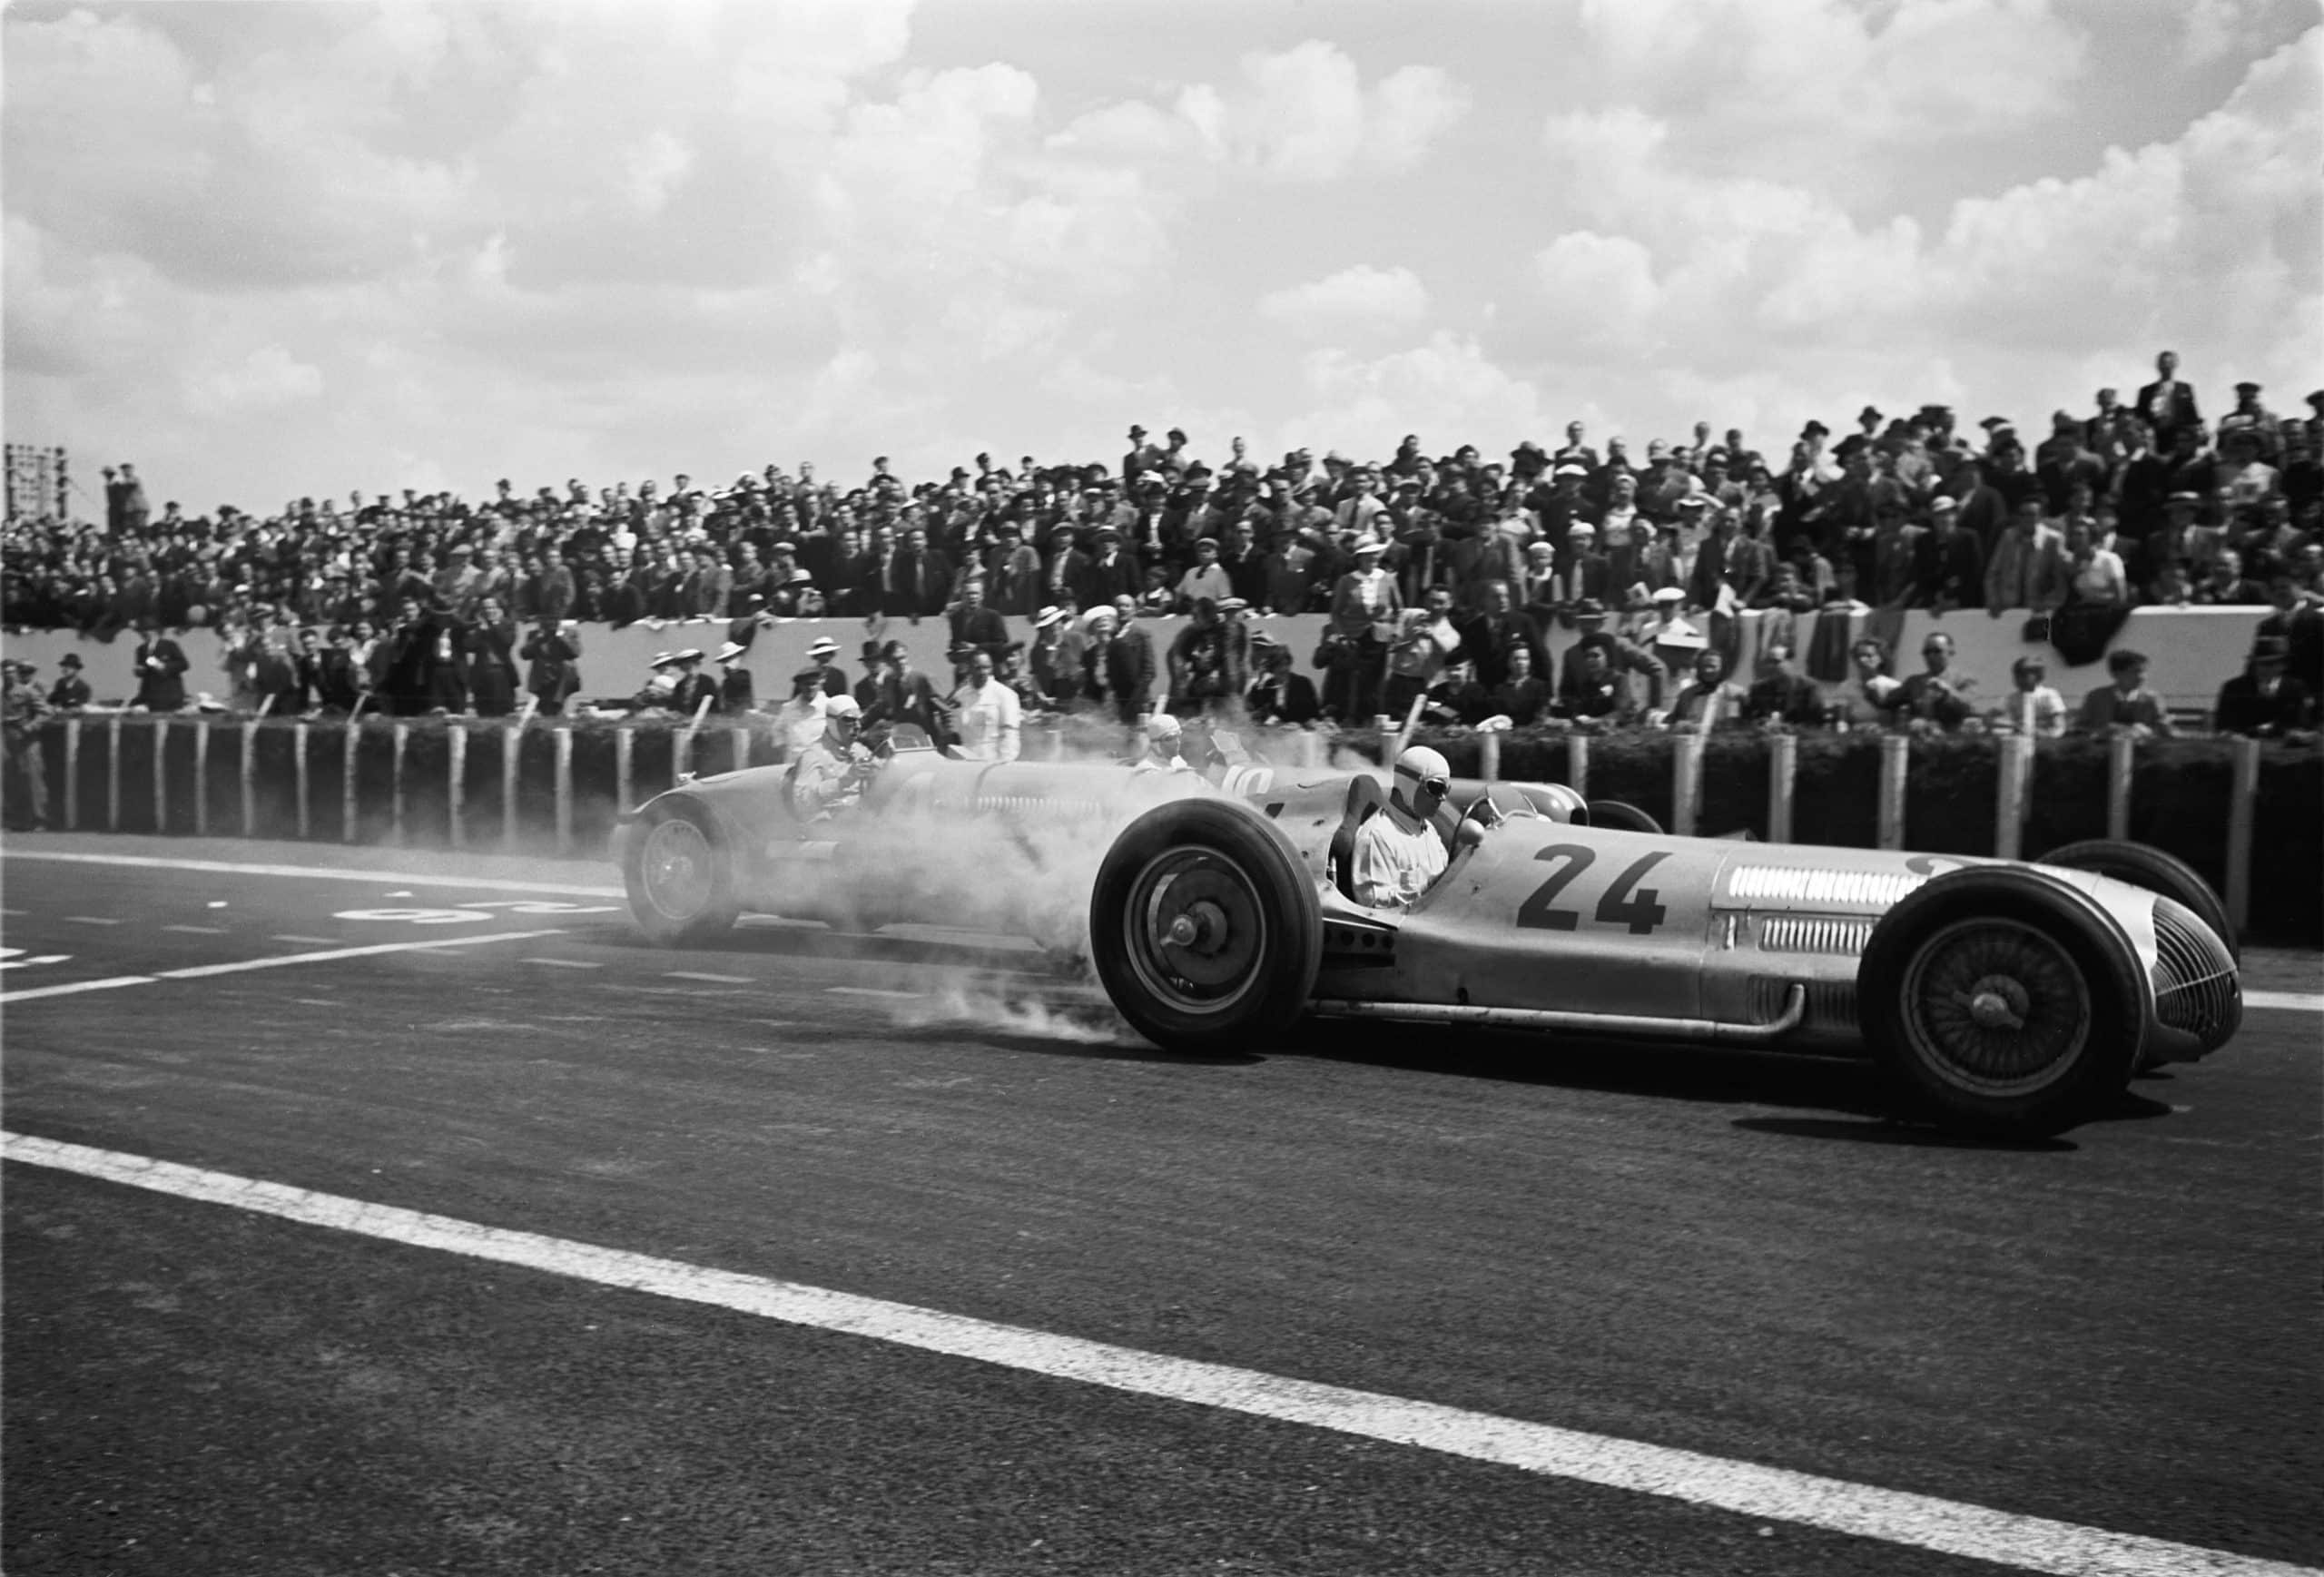 The French Grand Prix; Reims-Geuex, July 3, 1938. Rudolph Caracciola making a magnificent start in his Mercedes W154, his tire smoke almost hiding the car behind him. He finished second behind Manfred vonBrauchitsch and was followed by Hermann Lang in a Mercedes sweep. (Photo by Klemantaski Collection/Getty Images)